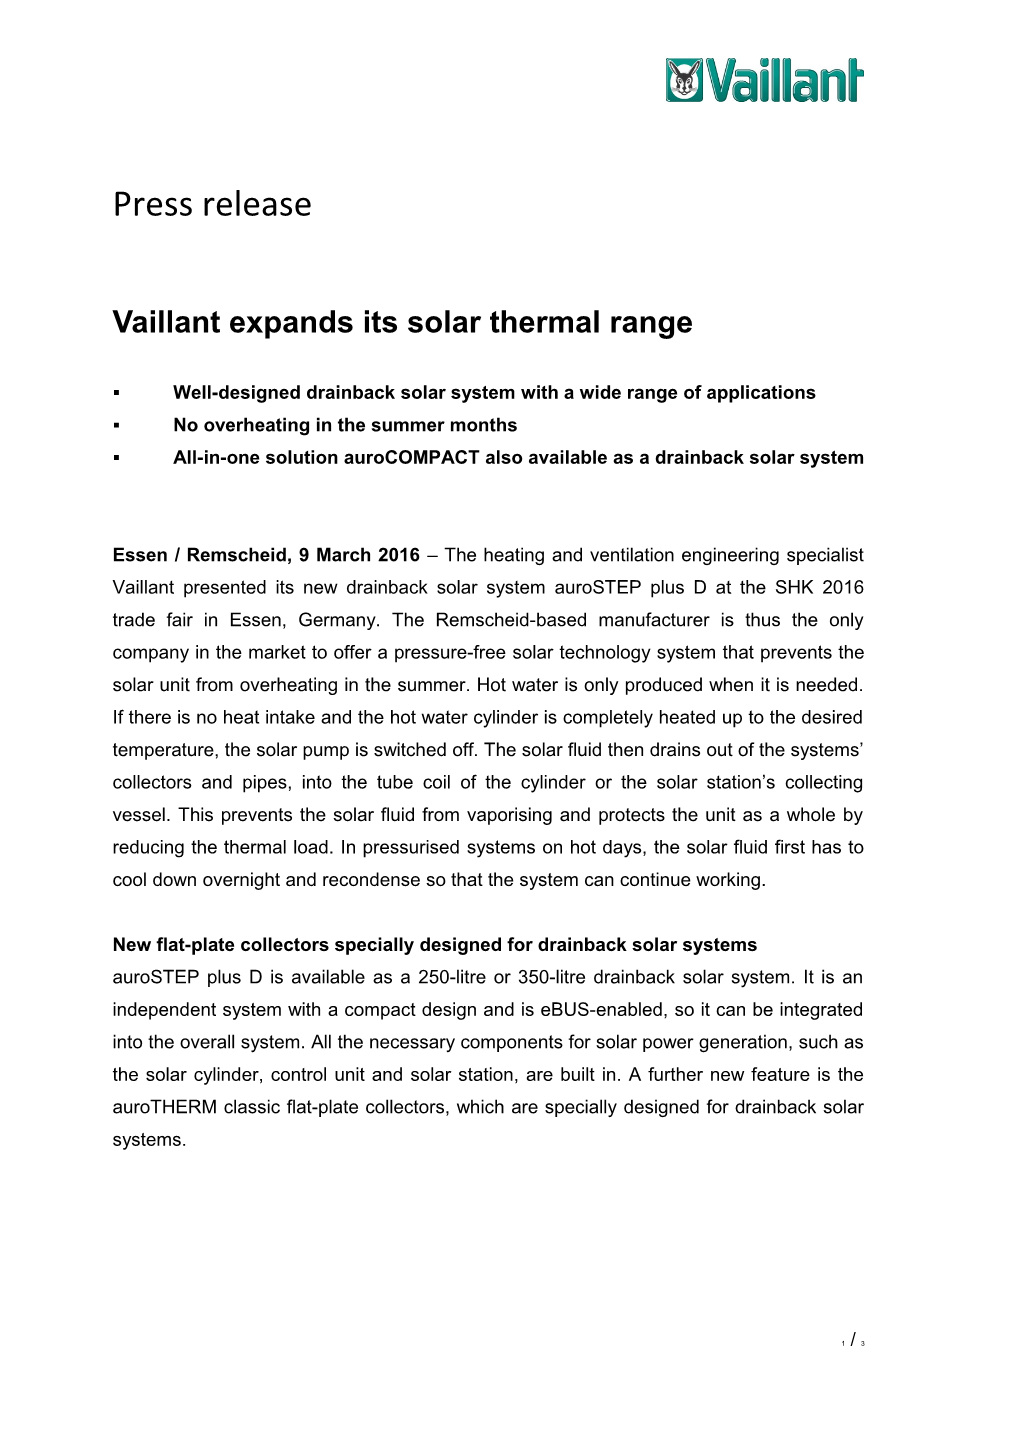 Vaillant Expands Its Solar Thermal Range